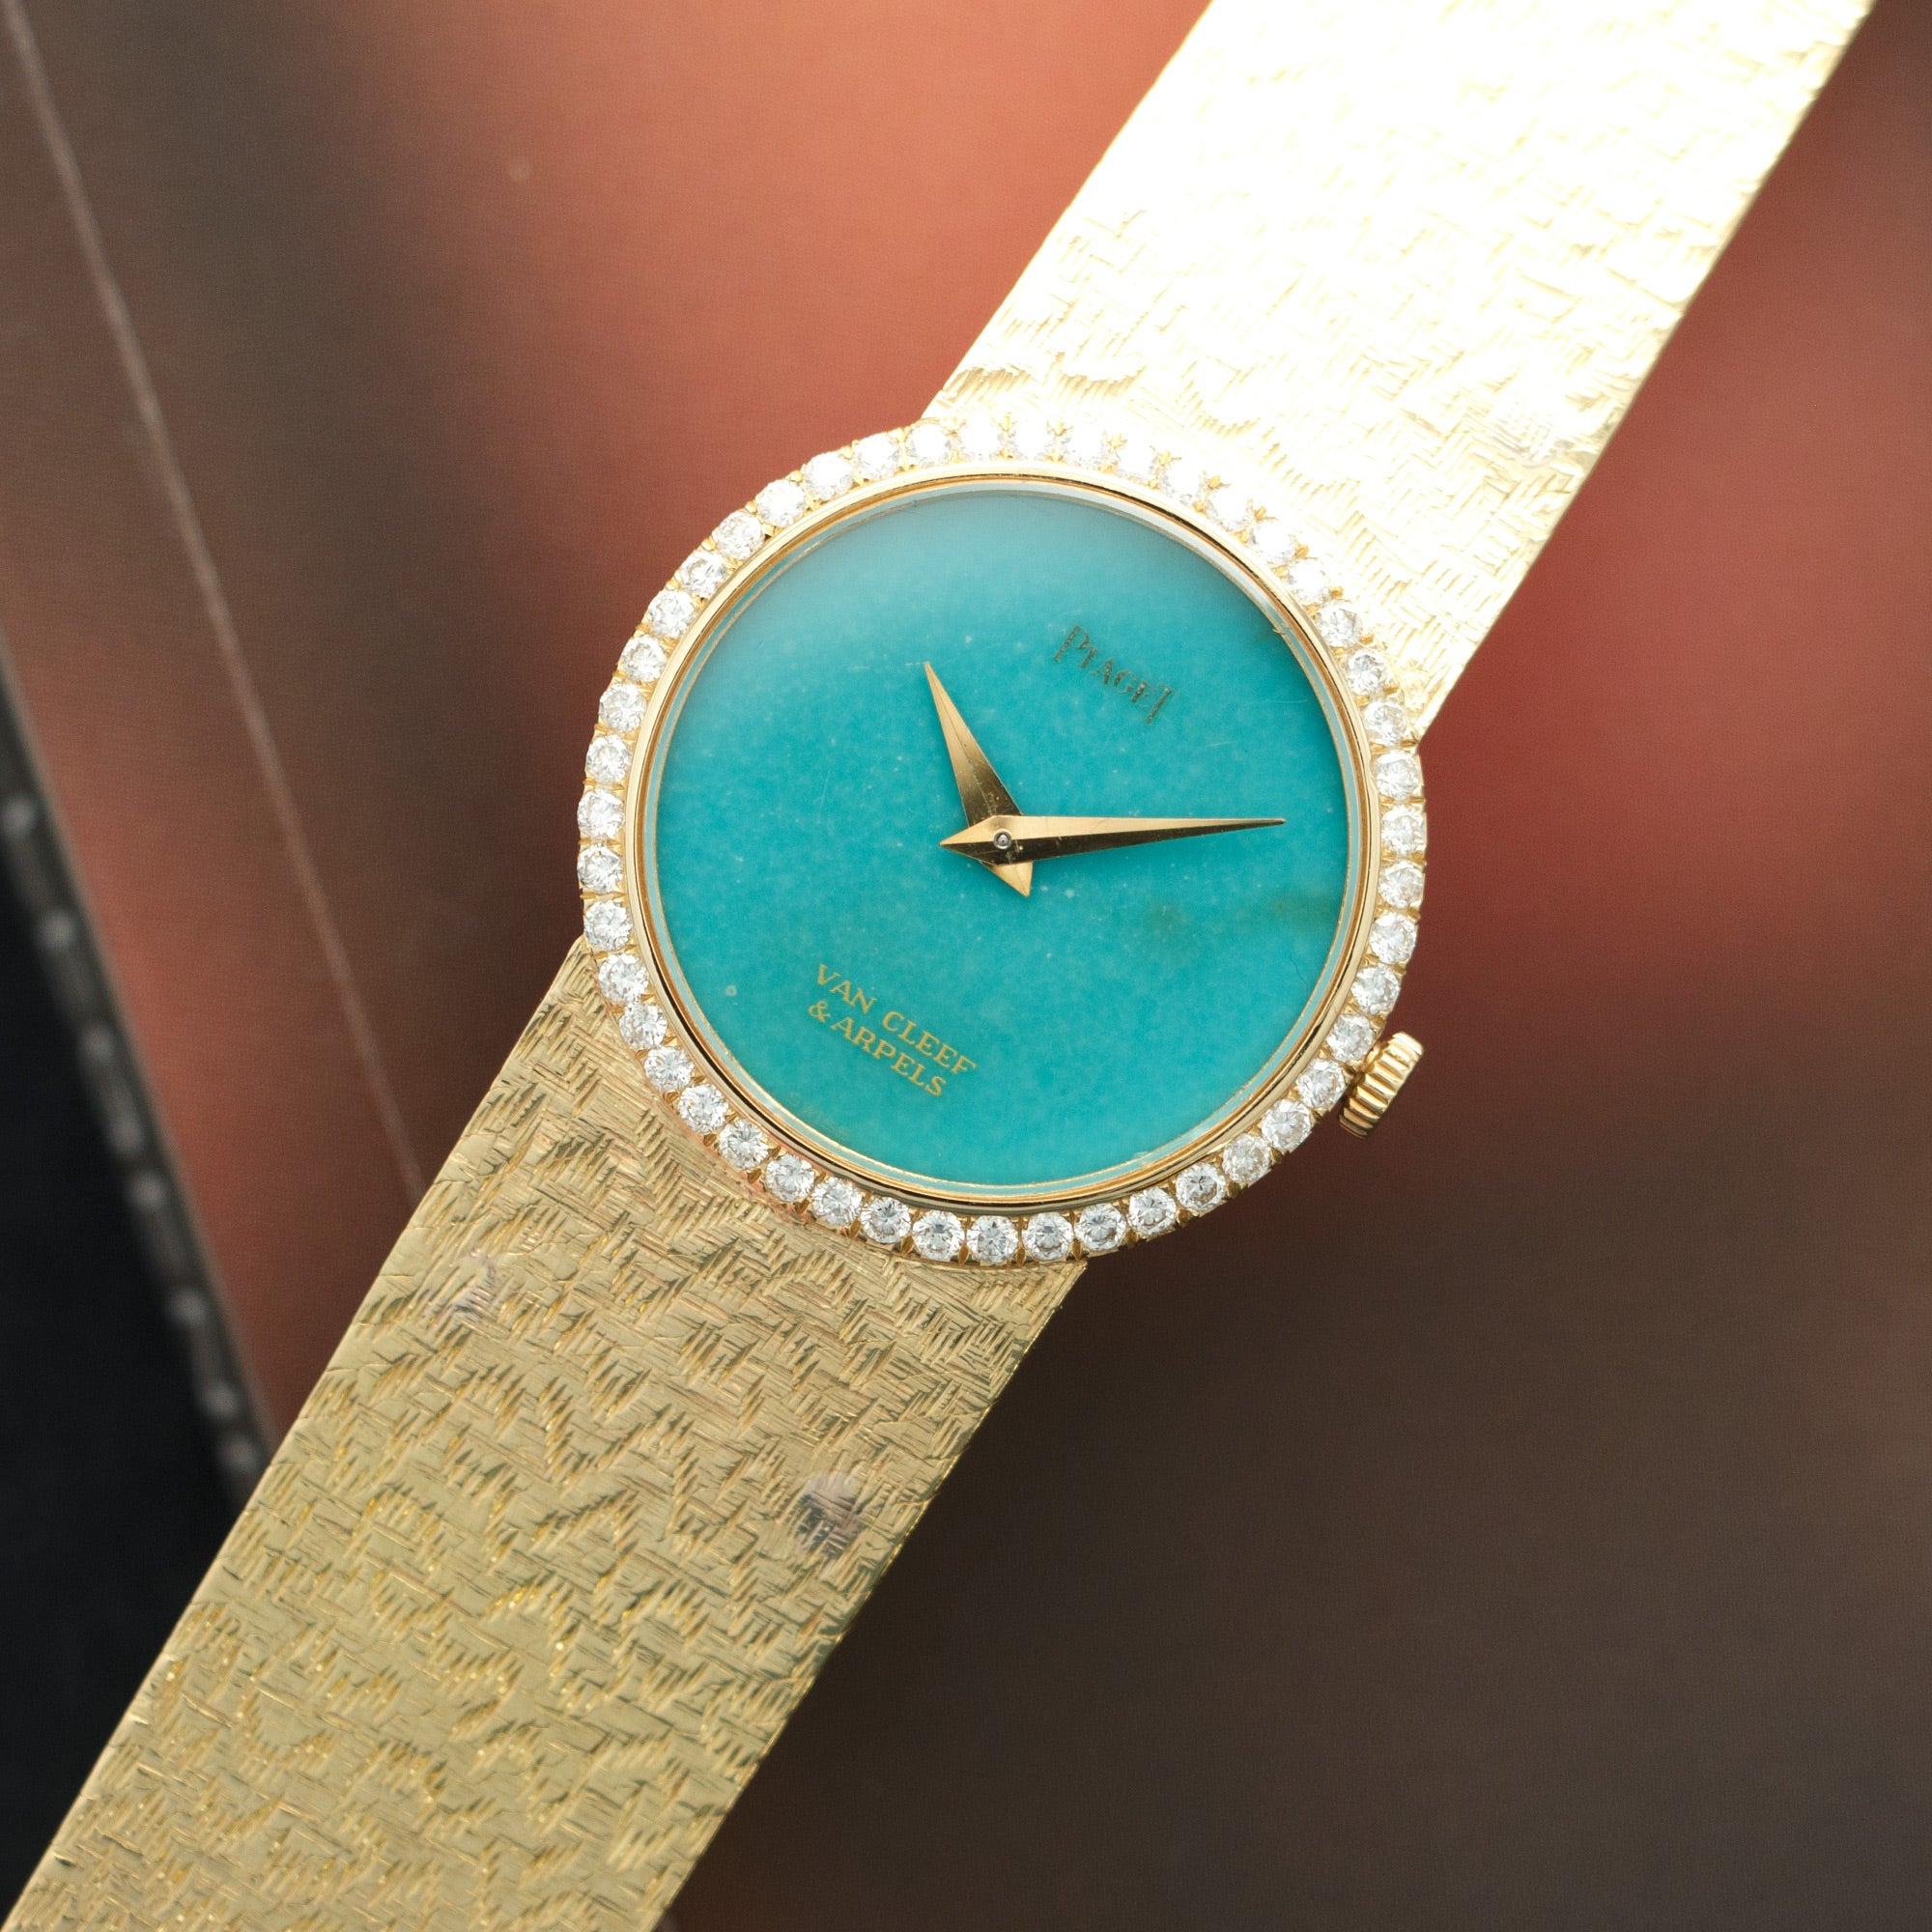 Piaget - Piaget Yellow Gold Turquoise Diamond Watch, Retailed by Van Cleef &amp; Arpels - The Keystone Watches